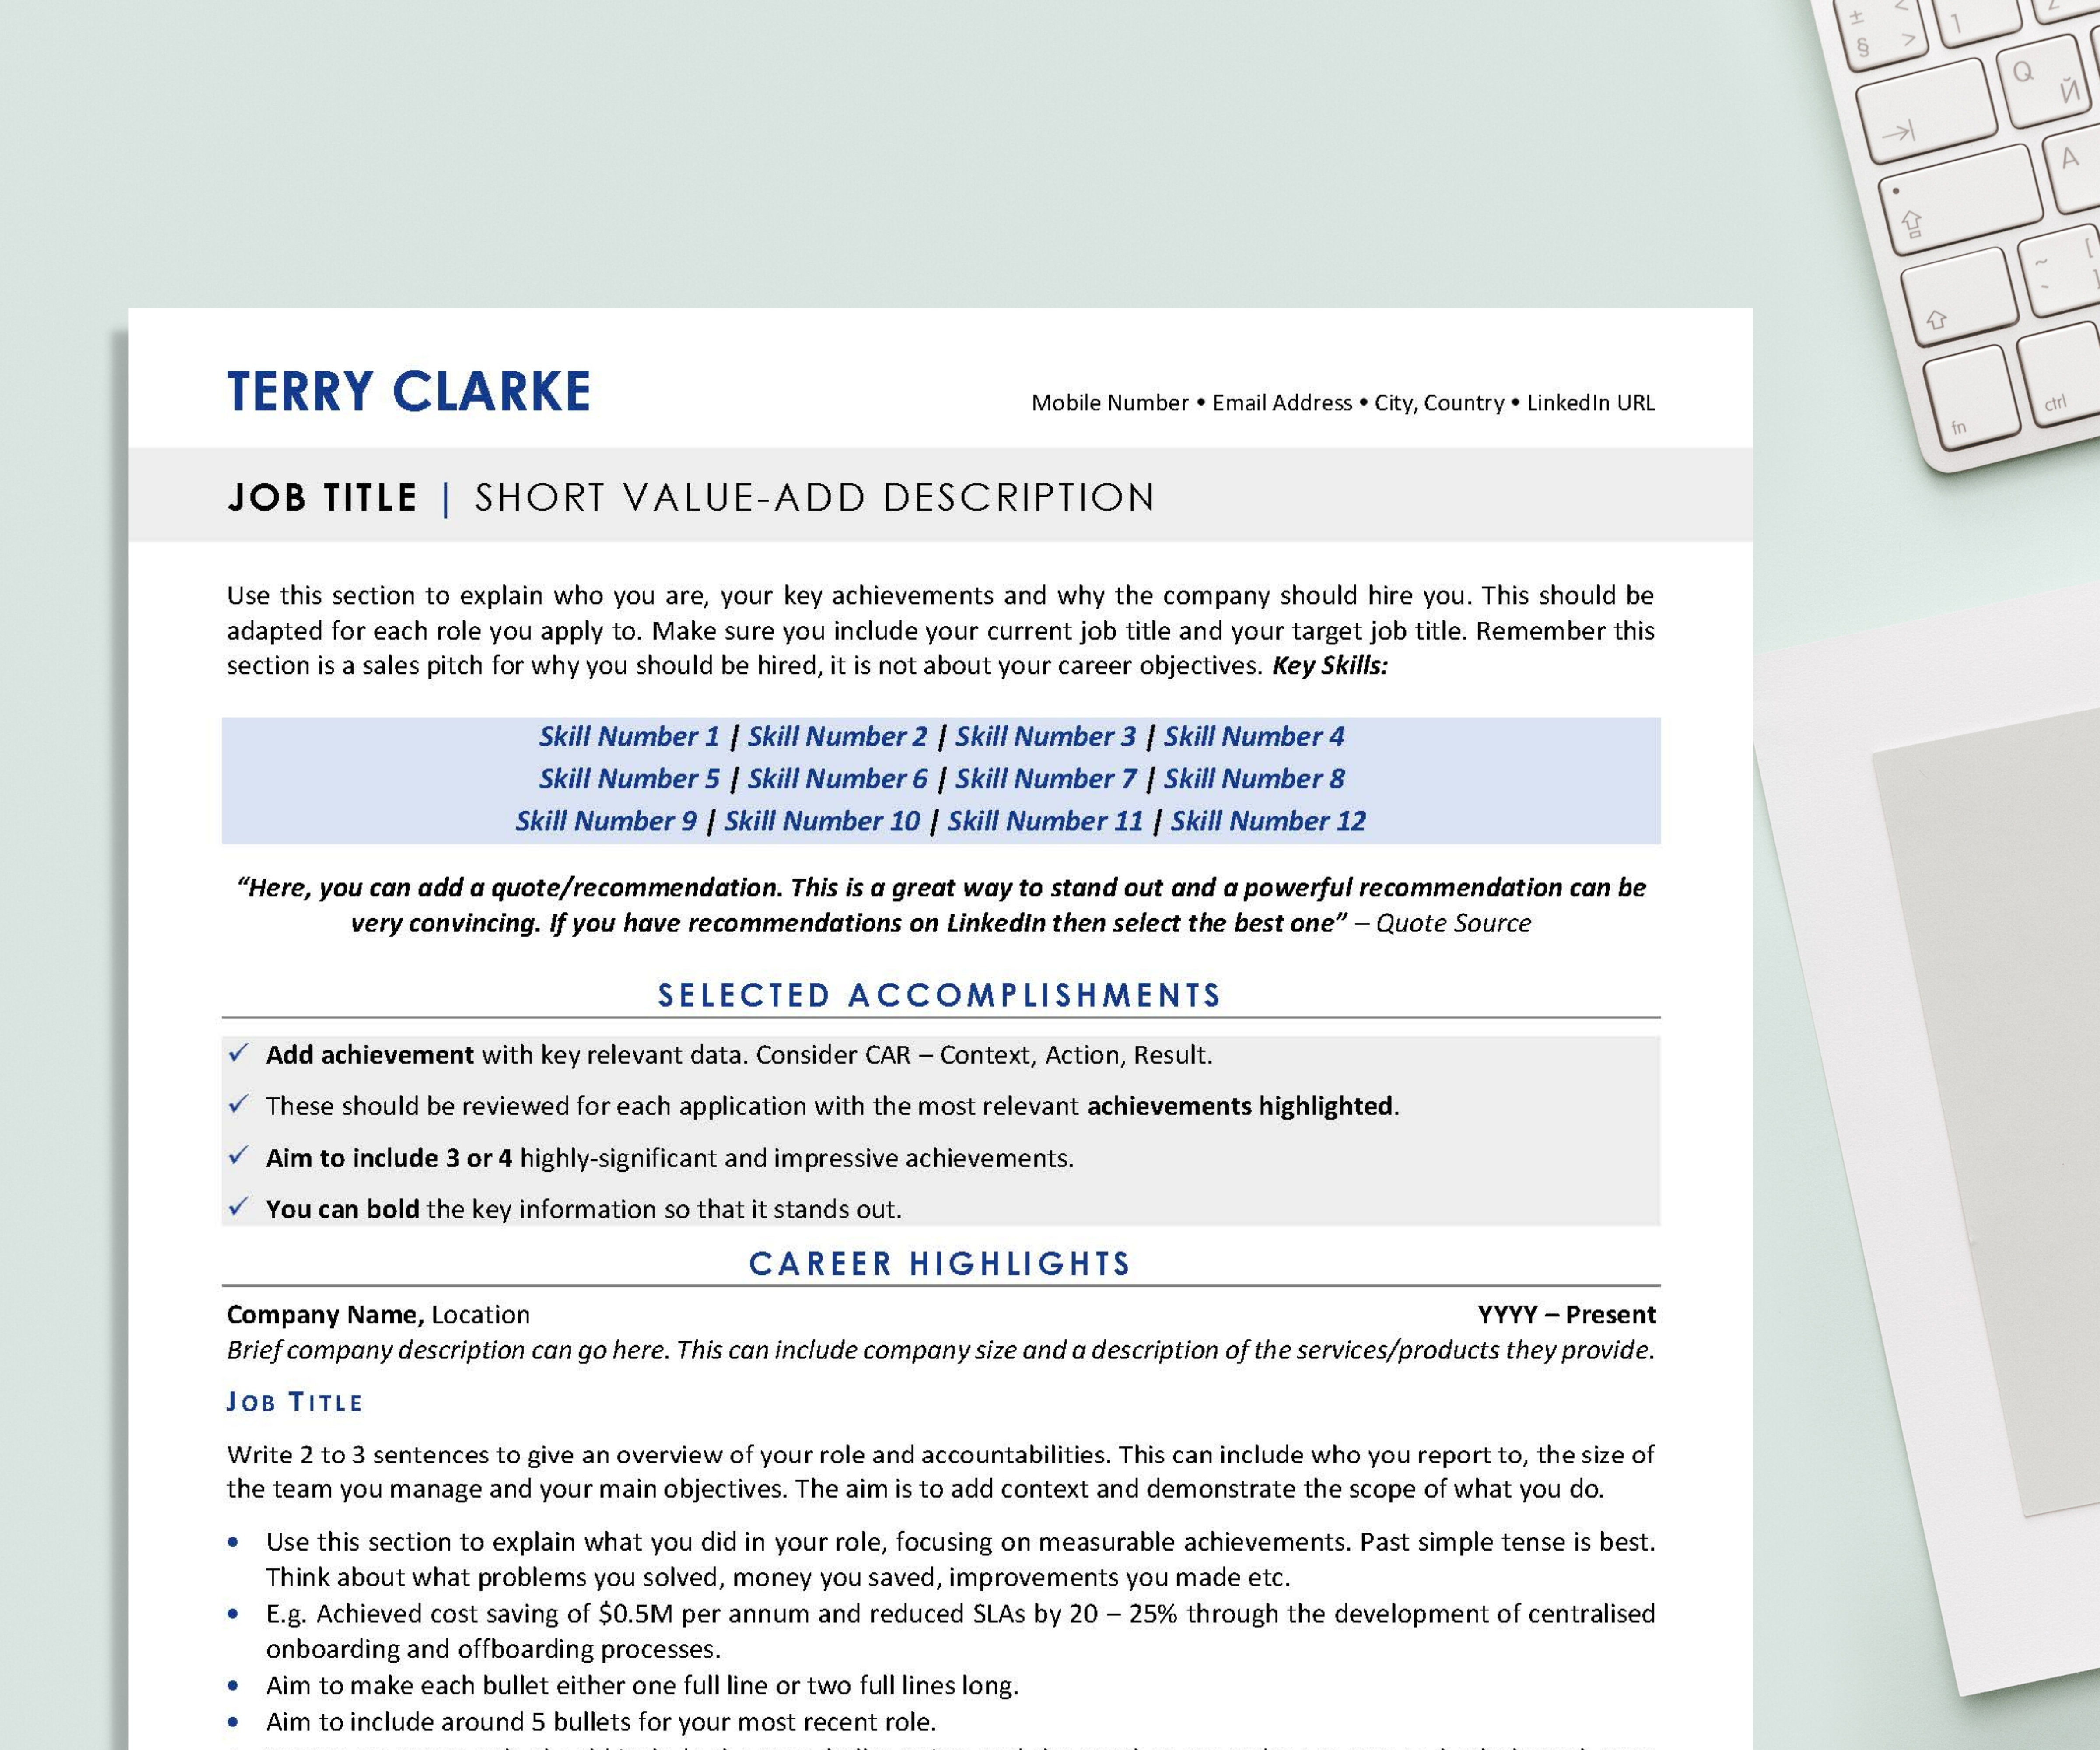 Navy Blue | Executive Resume and Cover Letter Template | ATS-Friendly | Designed by an Executive Resume Writer